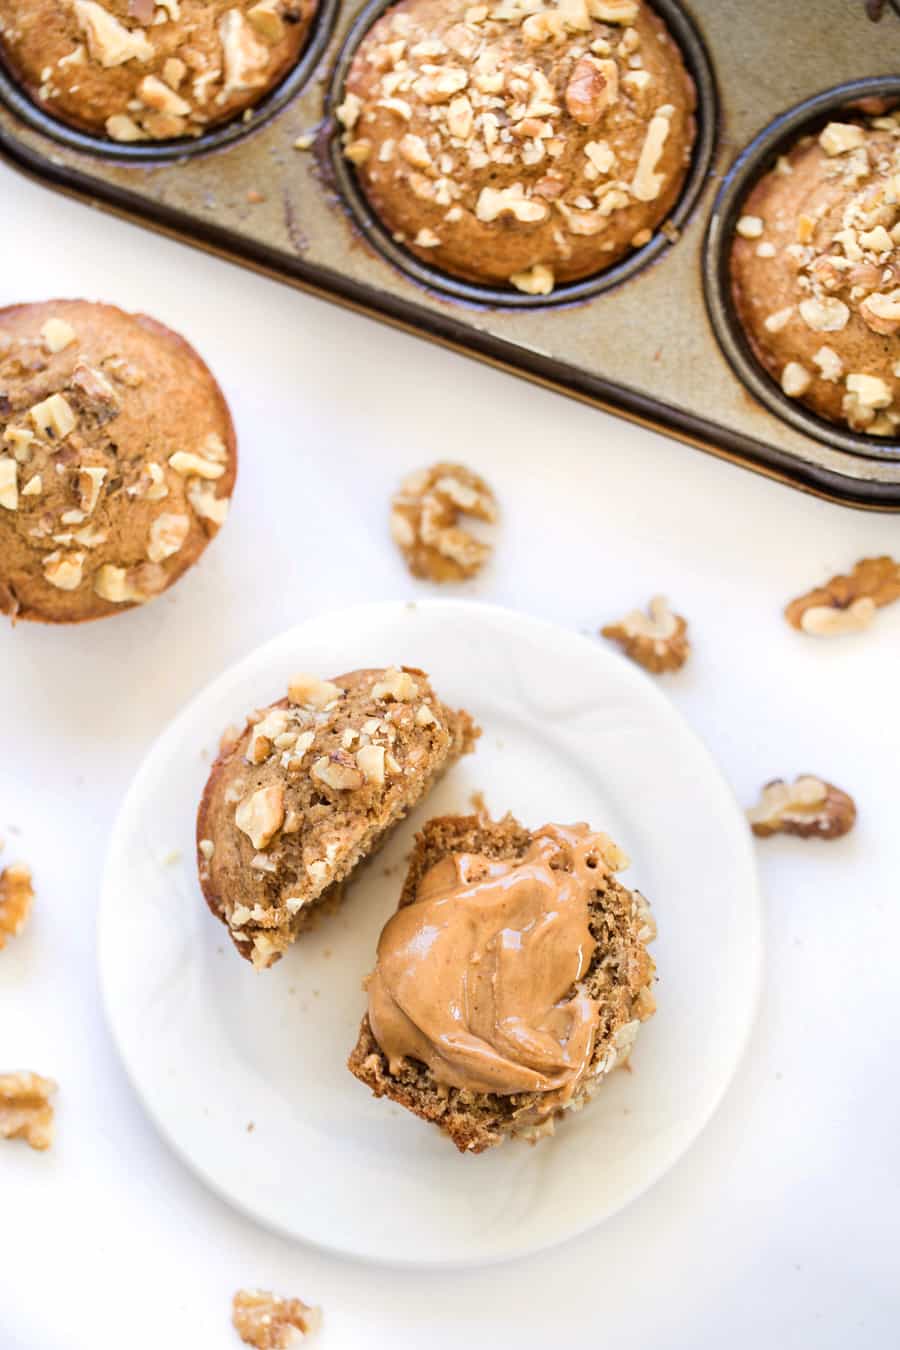 Overhead view of a banana muffin on a plate, cut in half, and topped with peanut butter, surrounded by more muffins and walnuts. 